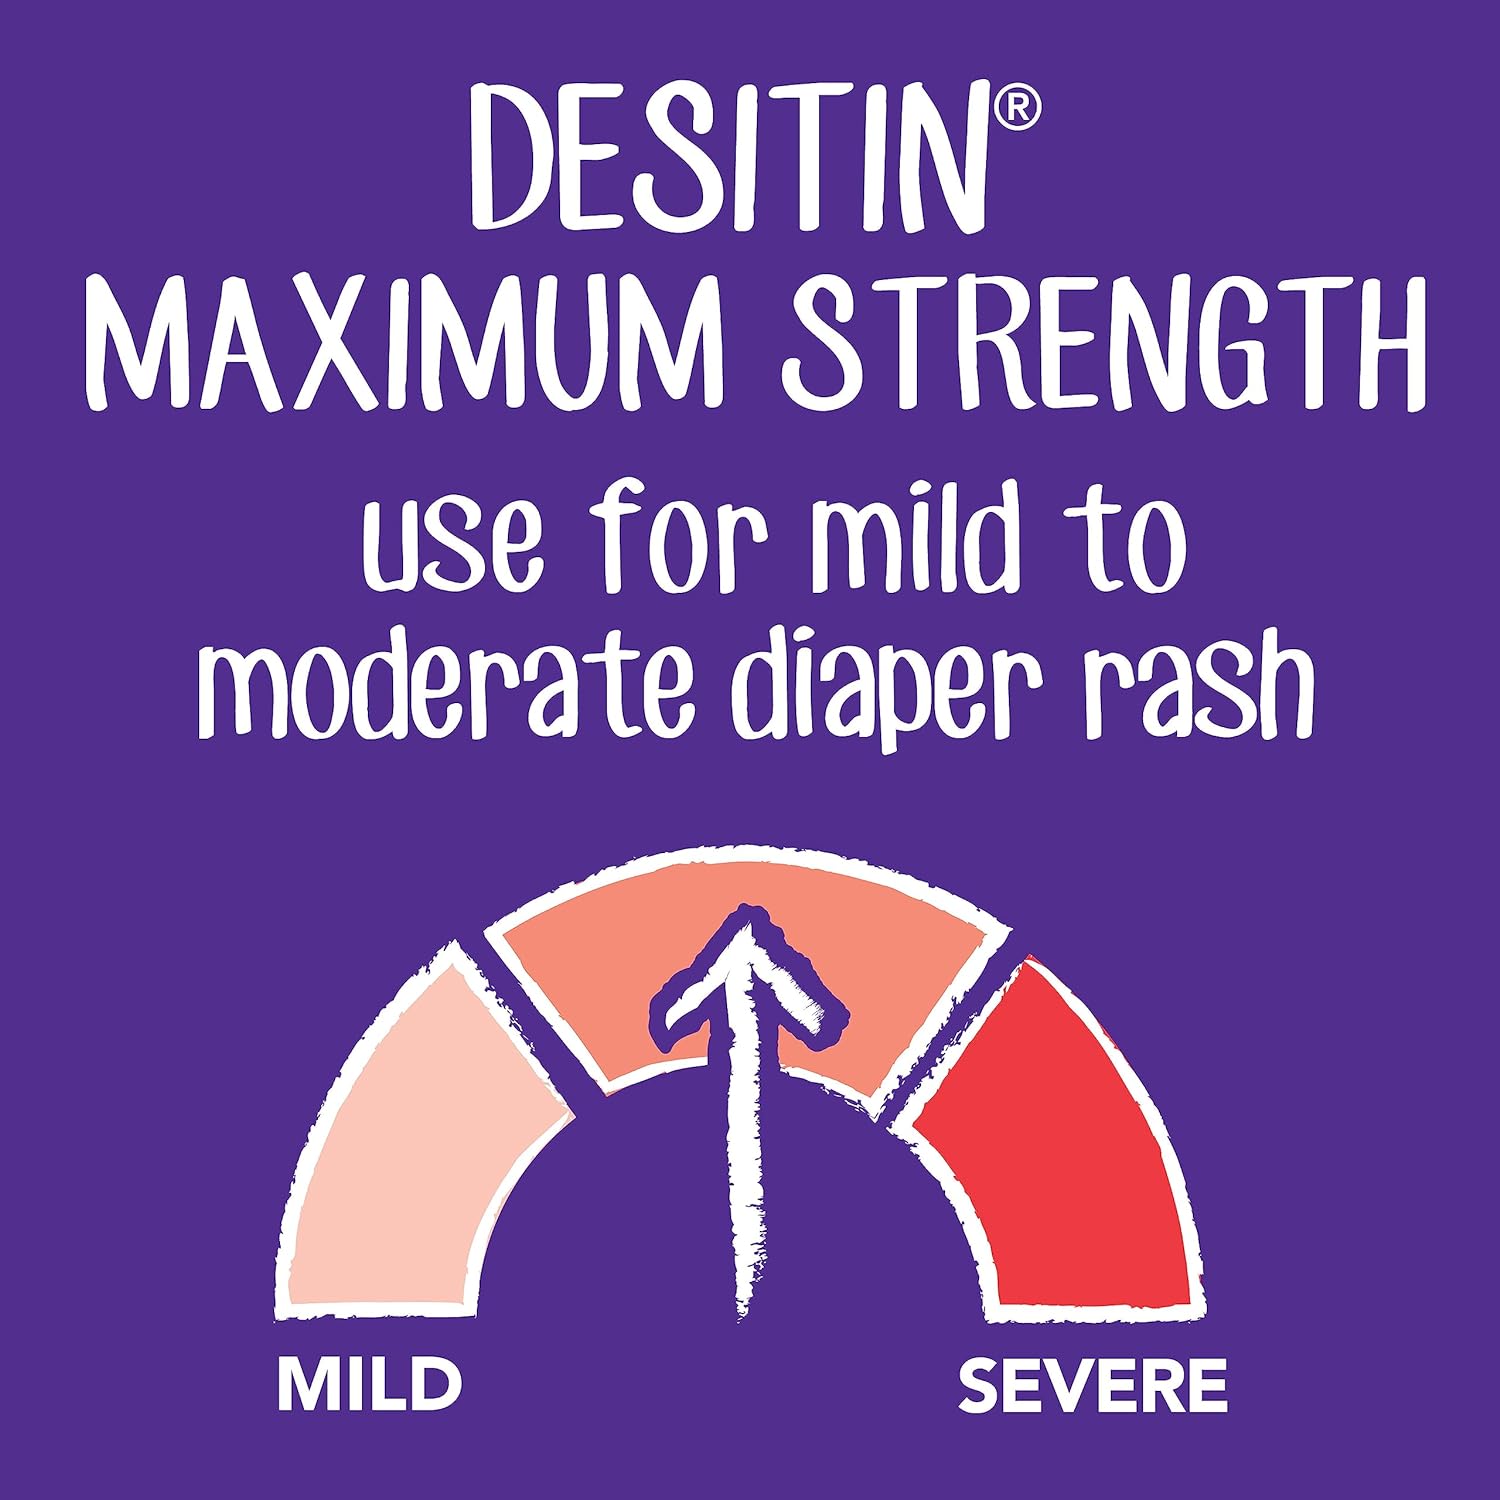 Desitin Maximum Strength Baby Diaper Rash Cream with 40% Zinc Oxide for Treatment, Relief & Prevention, Hypoallergenic, Phthalate- & Paraben-Free Paste, 4.8 oz